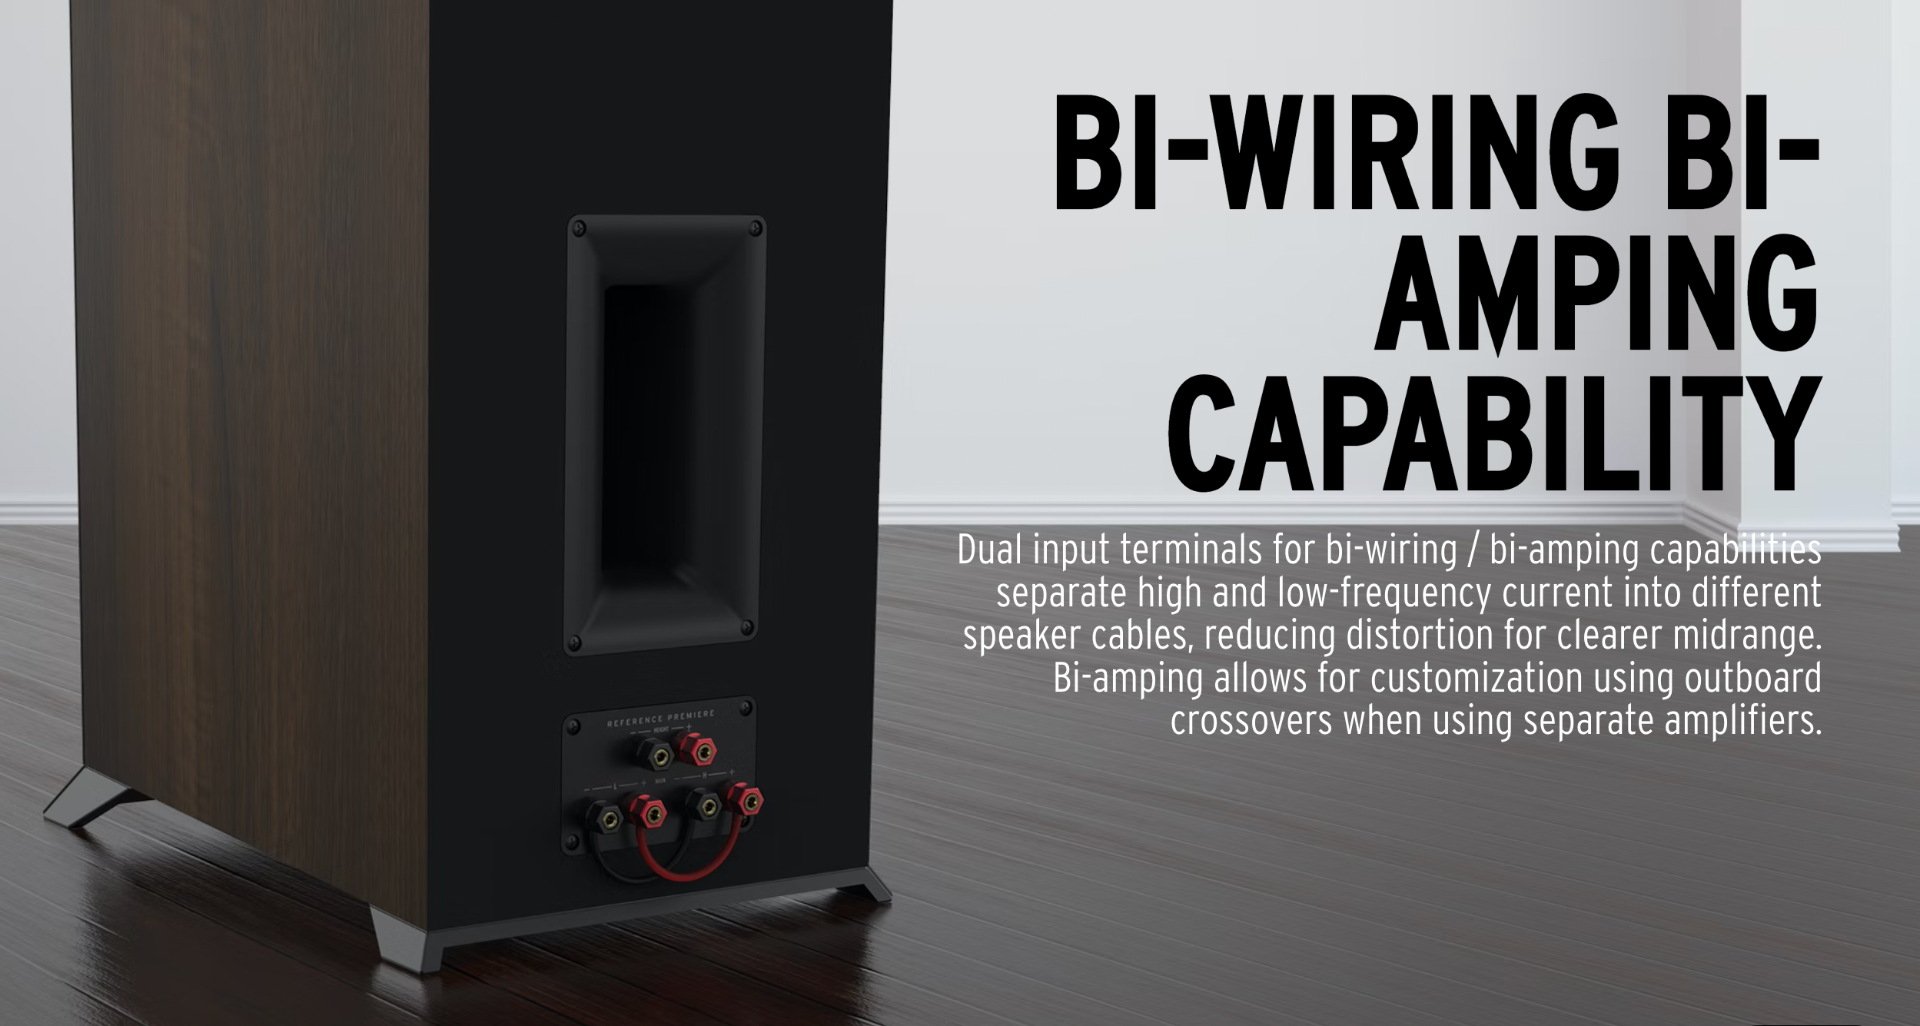 Dual input terminals for bi-wiring/bi-amping capabilities separate high and low-frequency current into different speaker cables, reducing distortion for clearer midrange. Bi-amping allows for customization using outboard crossovers when using separate amplifiers. 